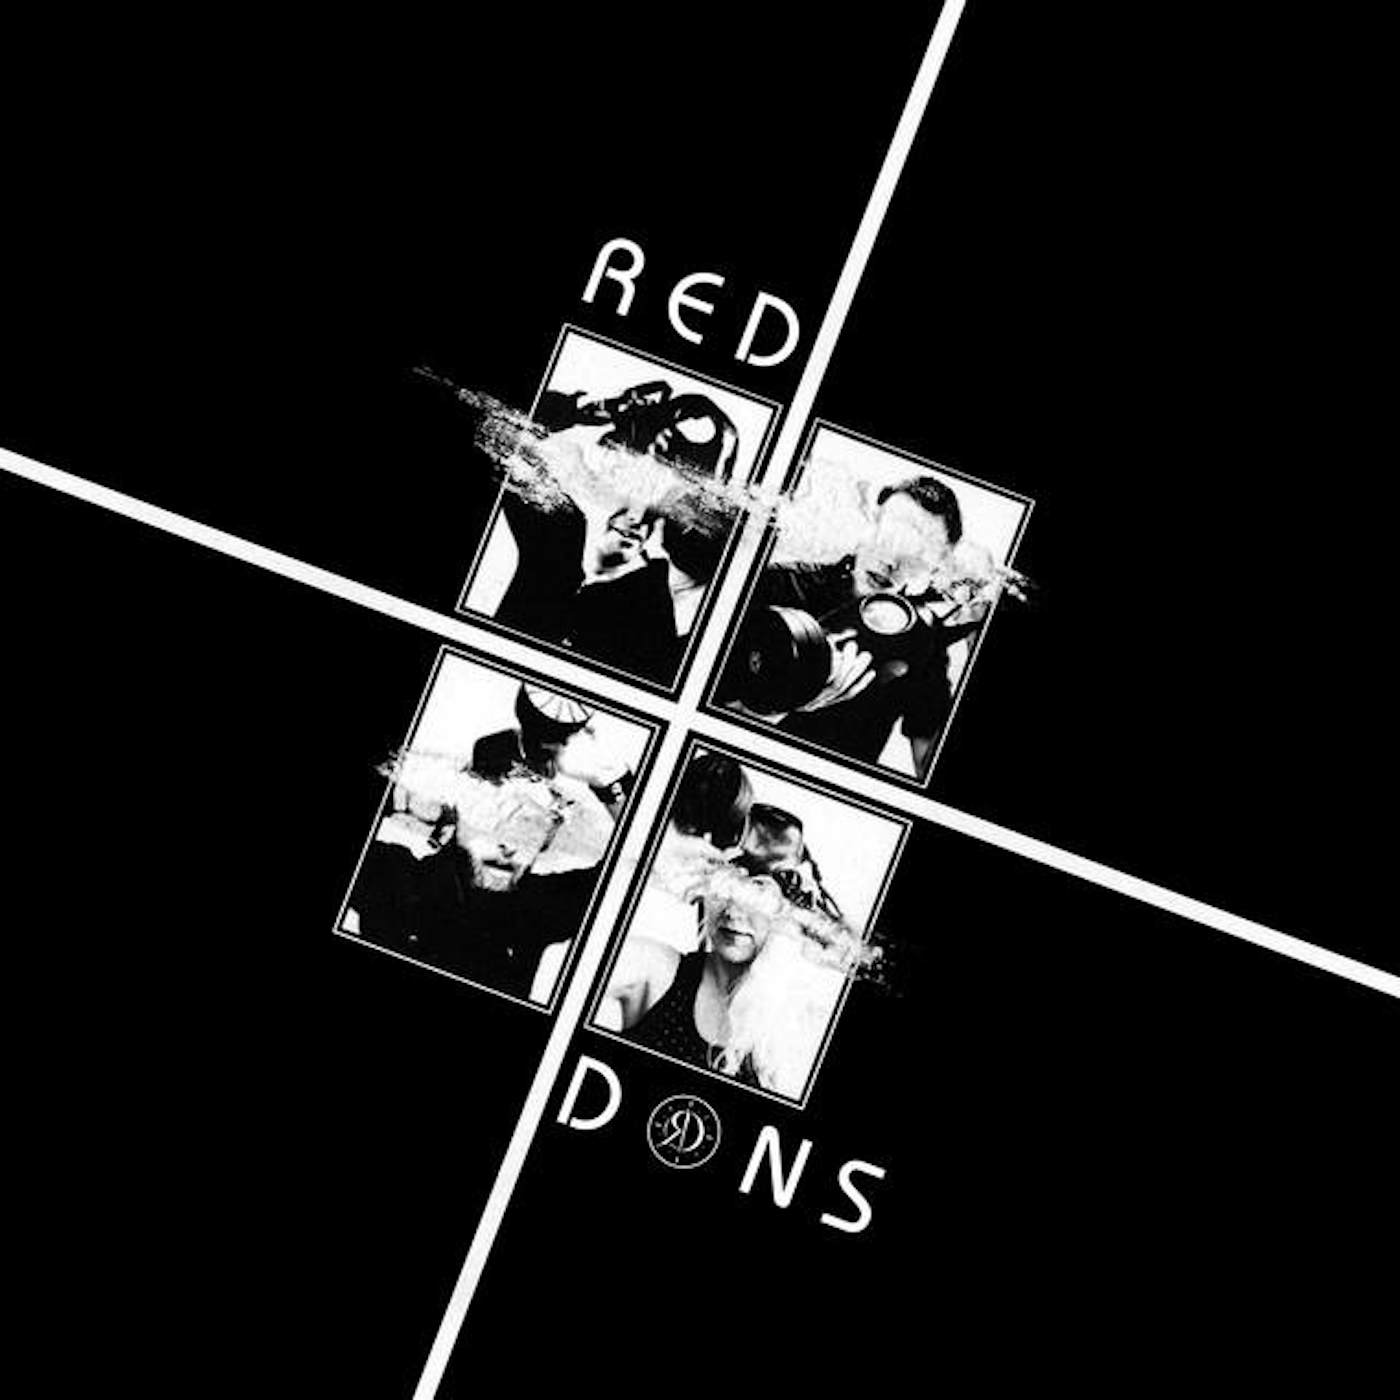 Red Dons